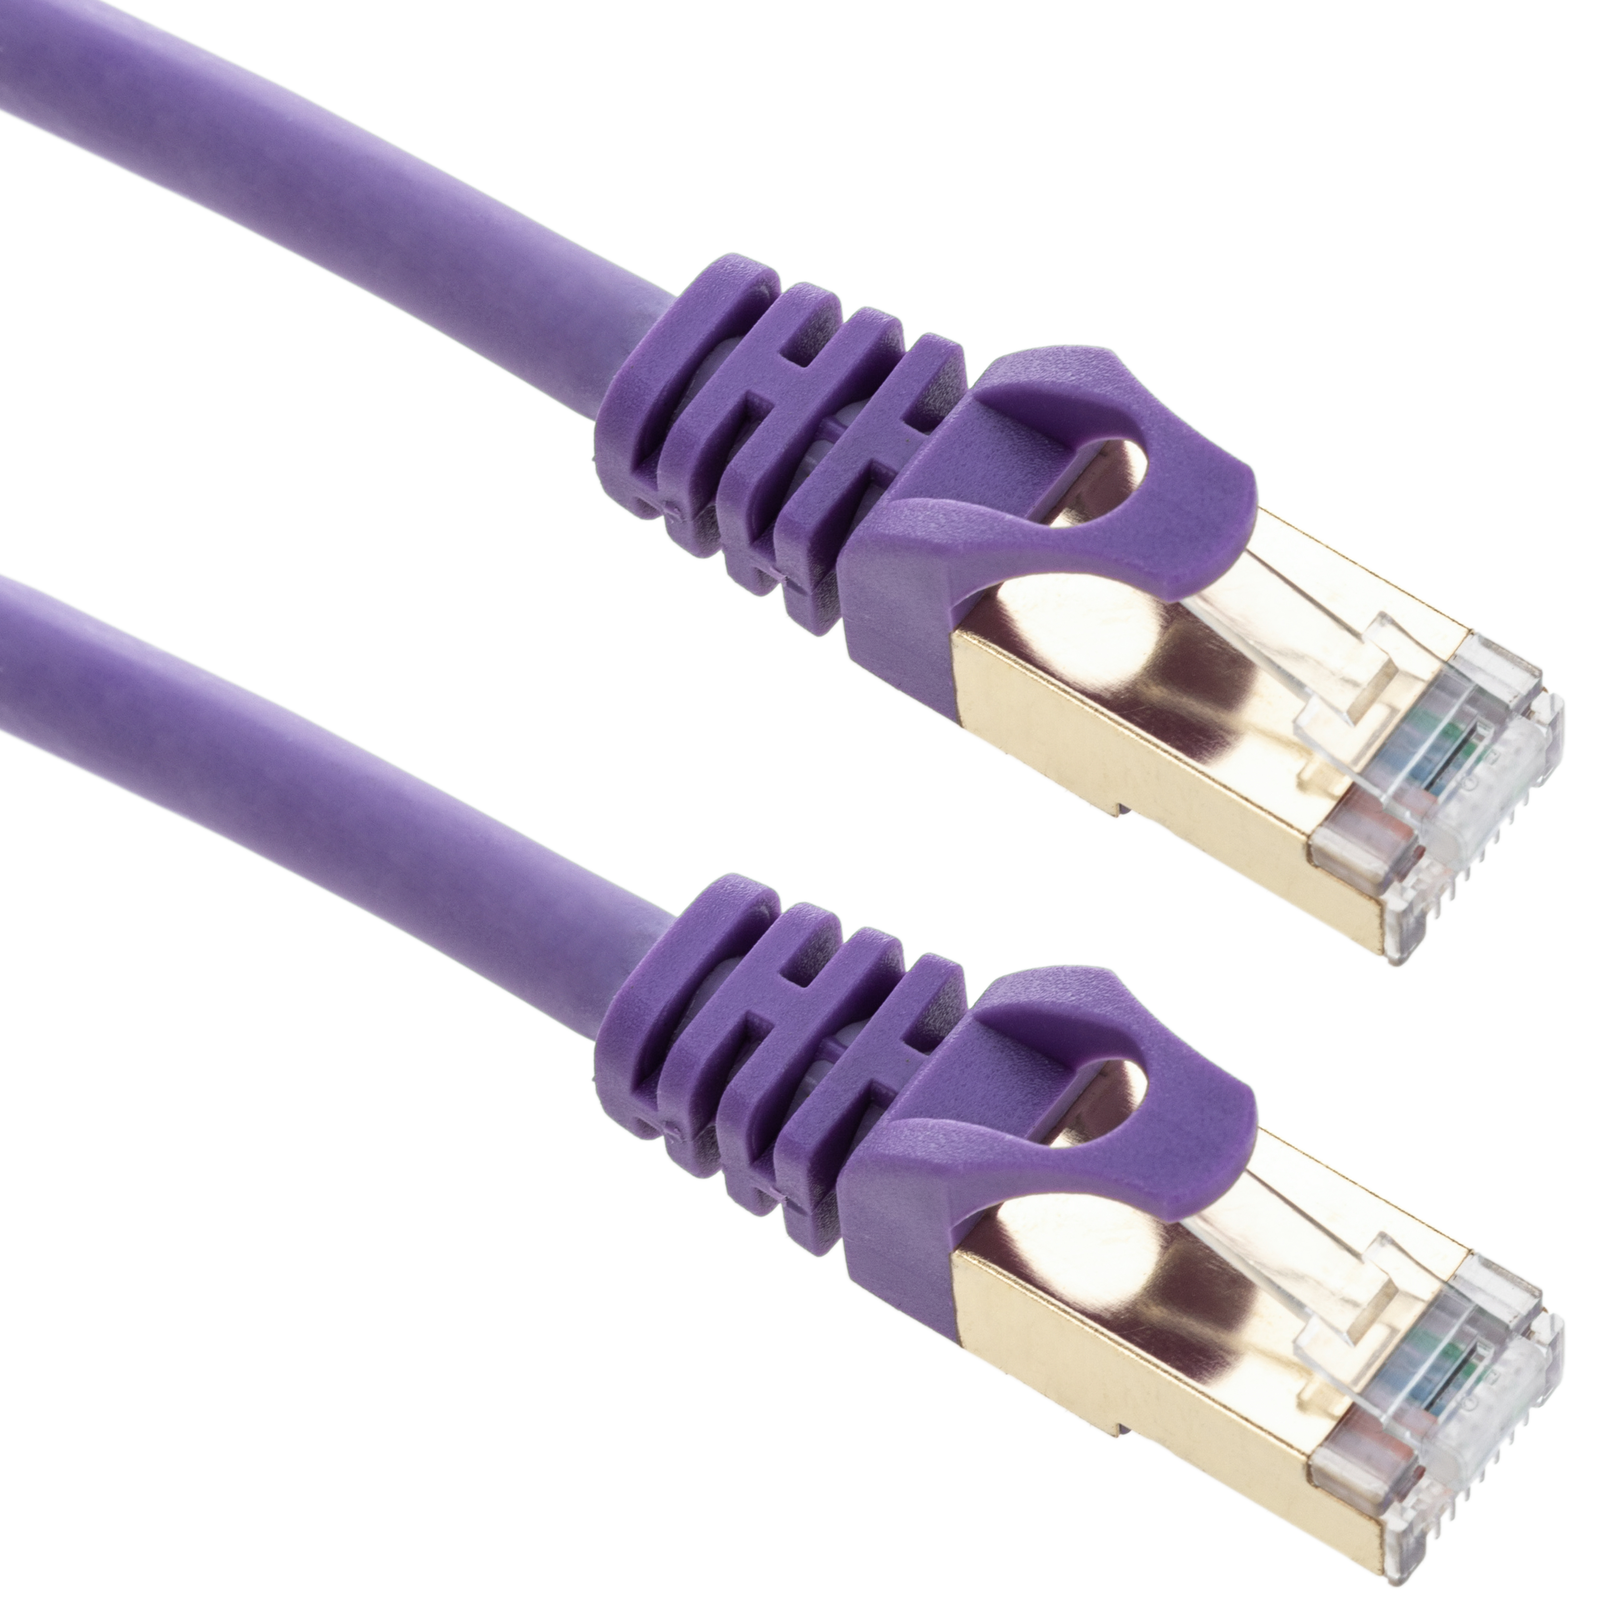 Cable de red ethernet 2 metros LAN SFTP RJ45 Cat.7 negro - Cablematic